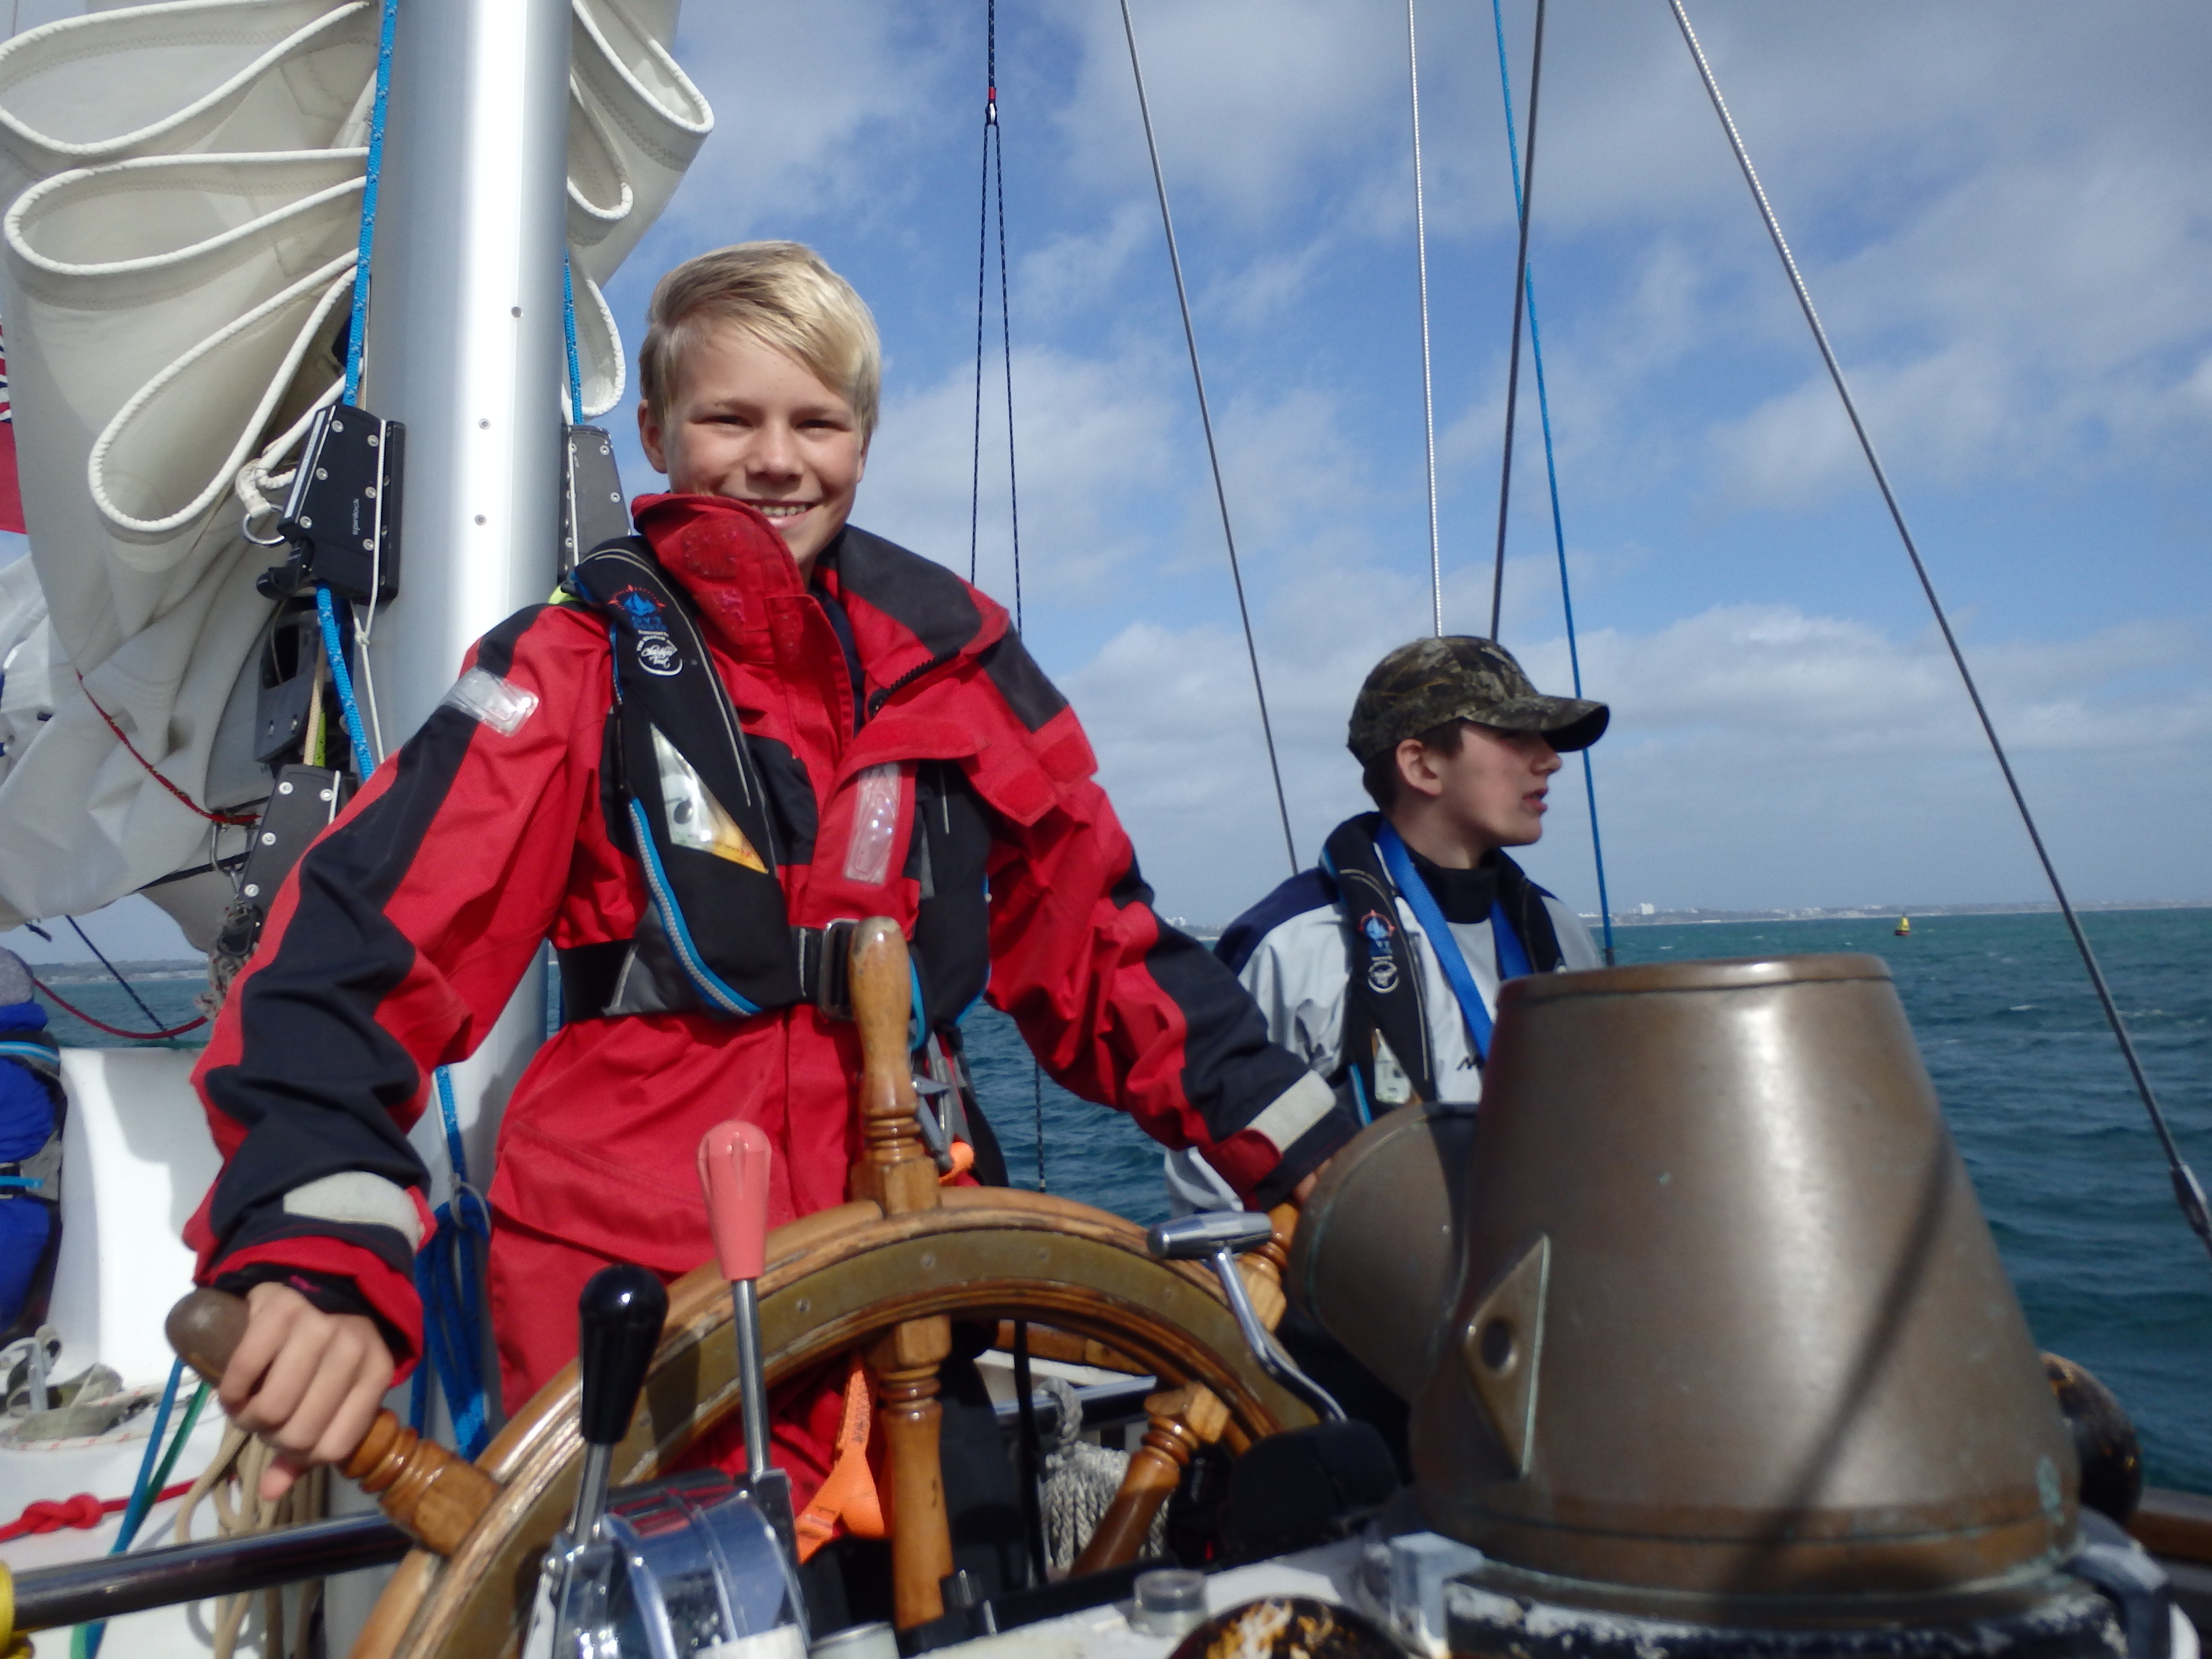 Poole Harbour Commissioners choose Ocean Youth Trust South as their charity partner for the 2019 Poole Harbour Boat Show